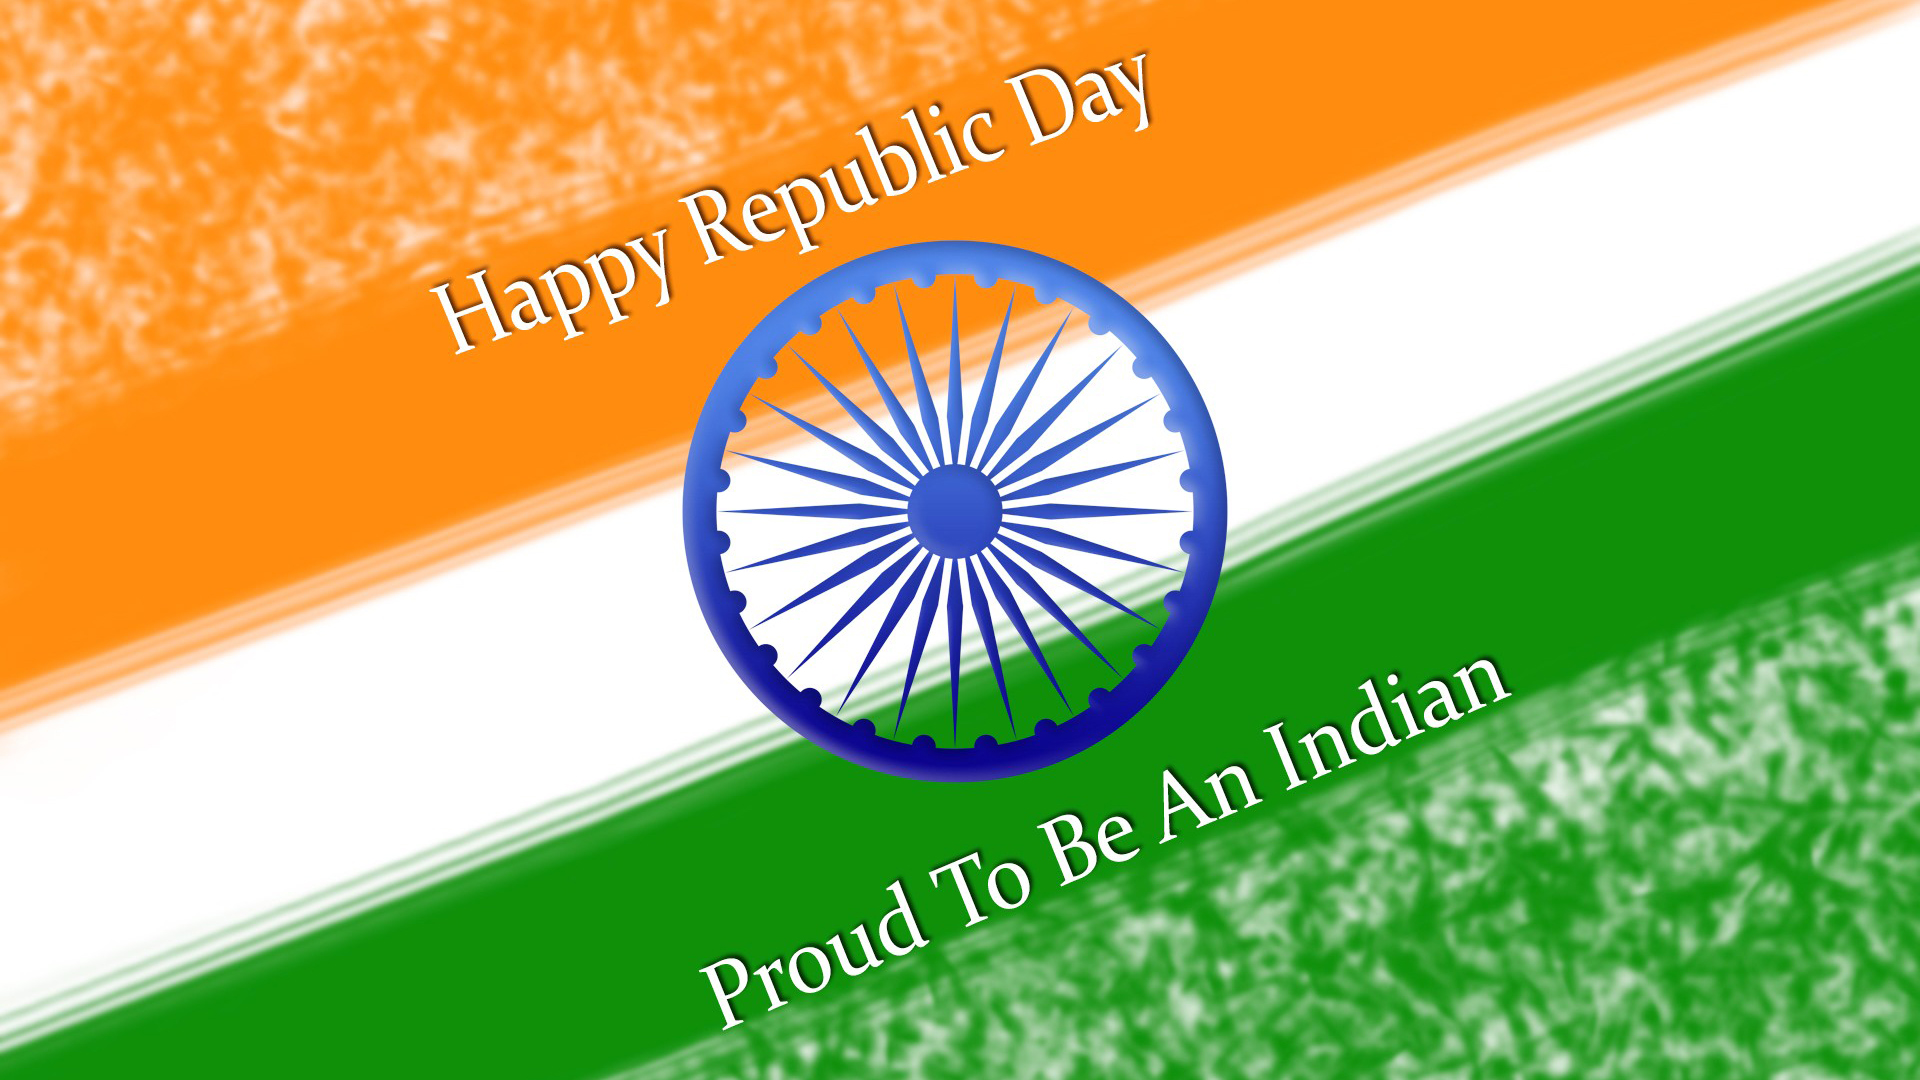 Republic Day Flag Image in HD for Wallpaper Wallpaper. Wallpaper Download. High Resolution Wallpaper